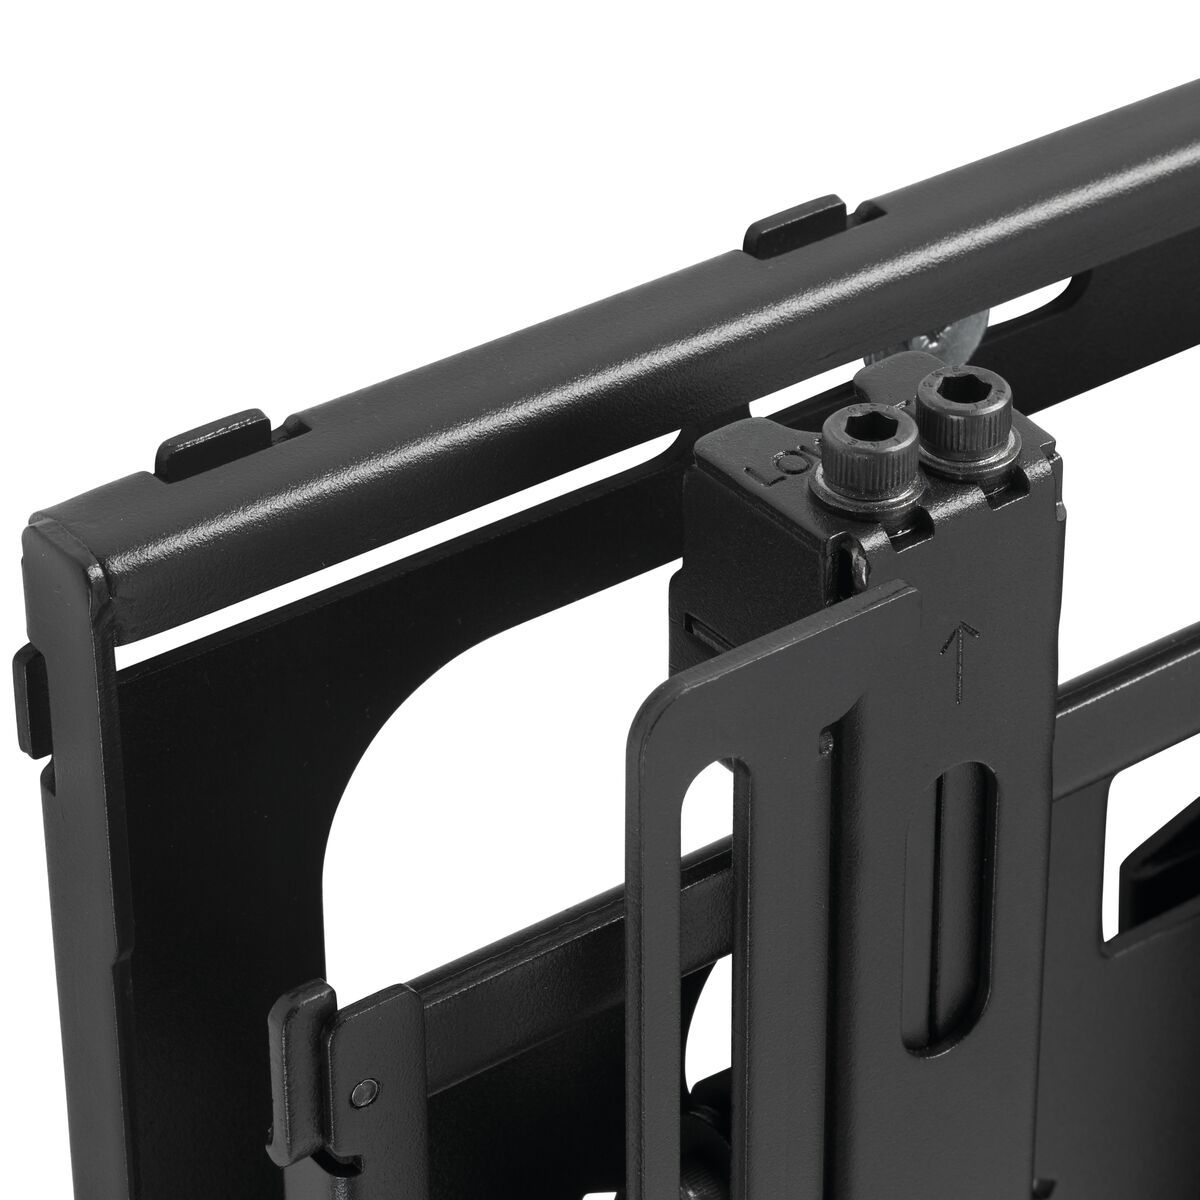 Vogel's - PFW 6880 Video Wall Pop-Out Mount - Detail